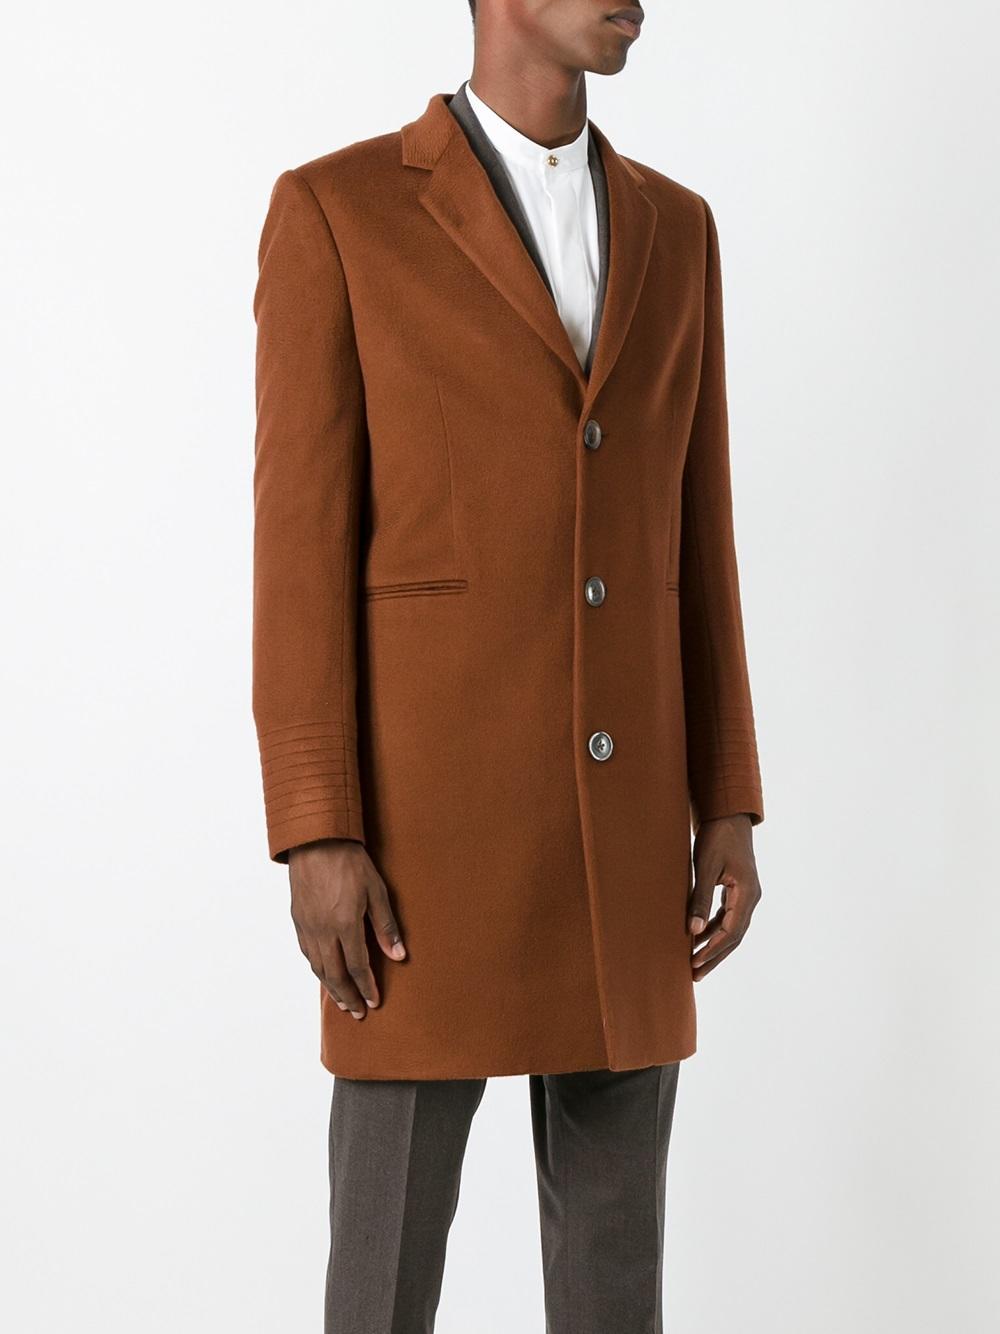 Paul Smith Cashmere 'a Coat To Travel In' Overcoat in Brown for Men - Lyst